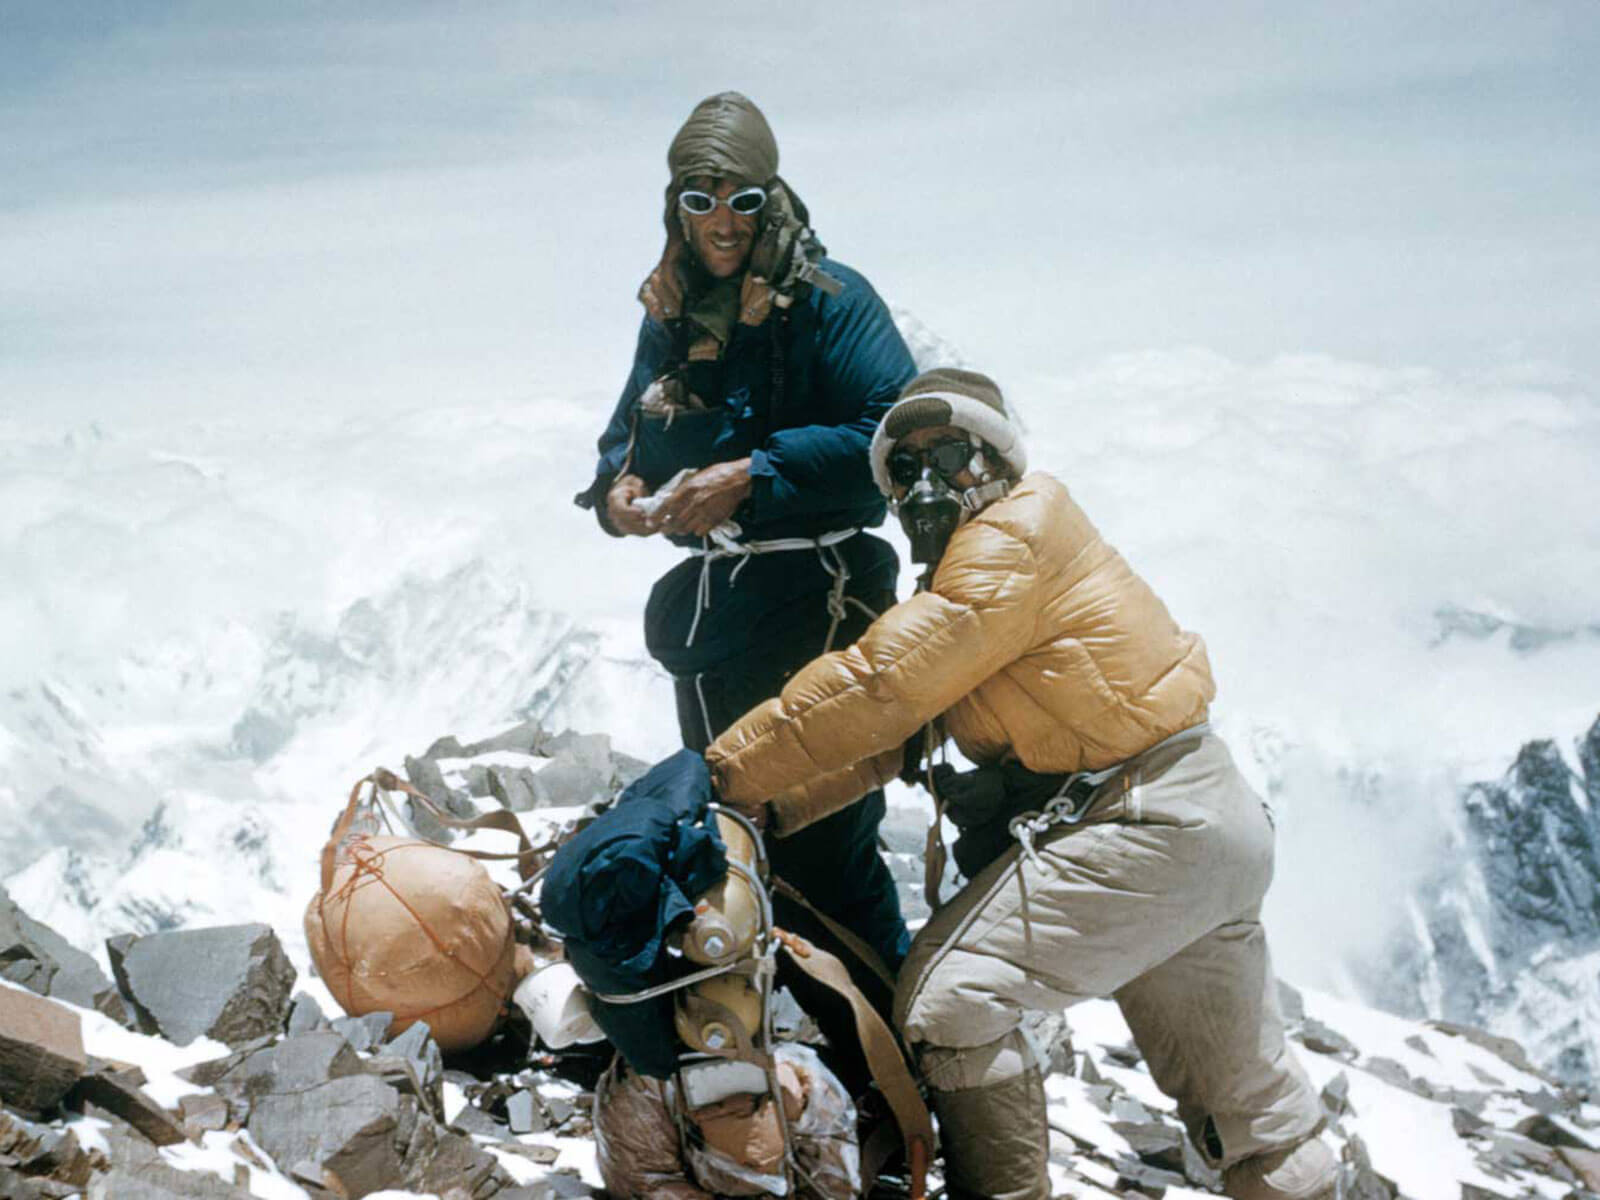 Tenzing Norgay and Edmund Hillary reached the summit of Mount Everest